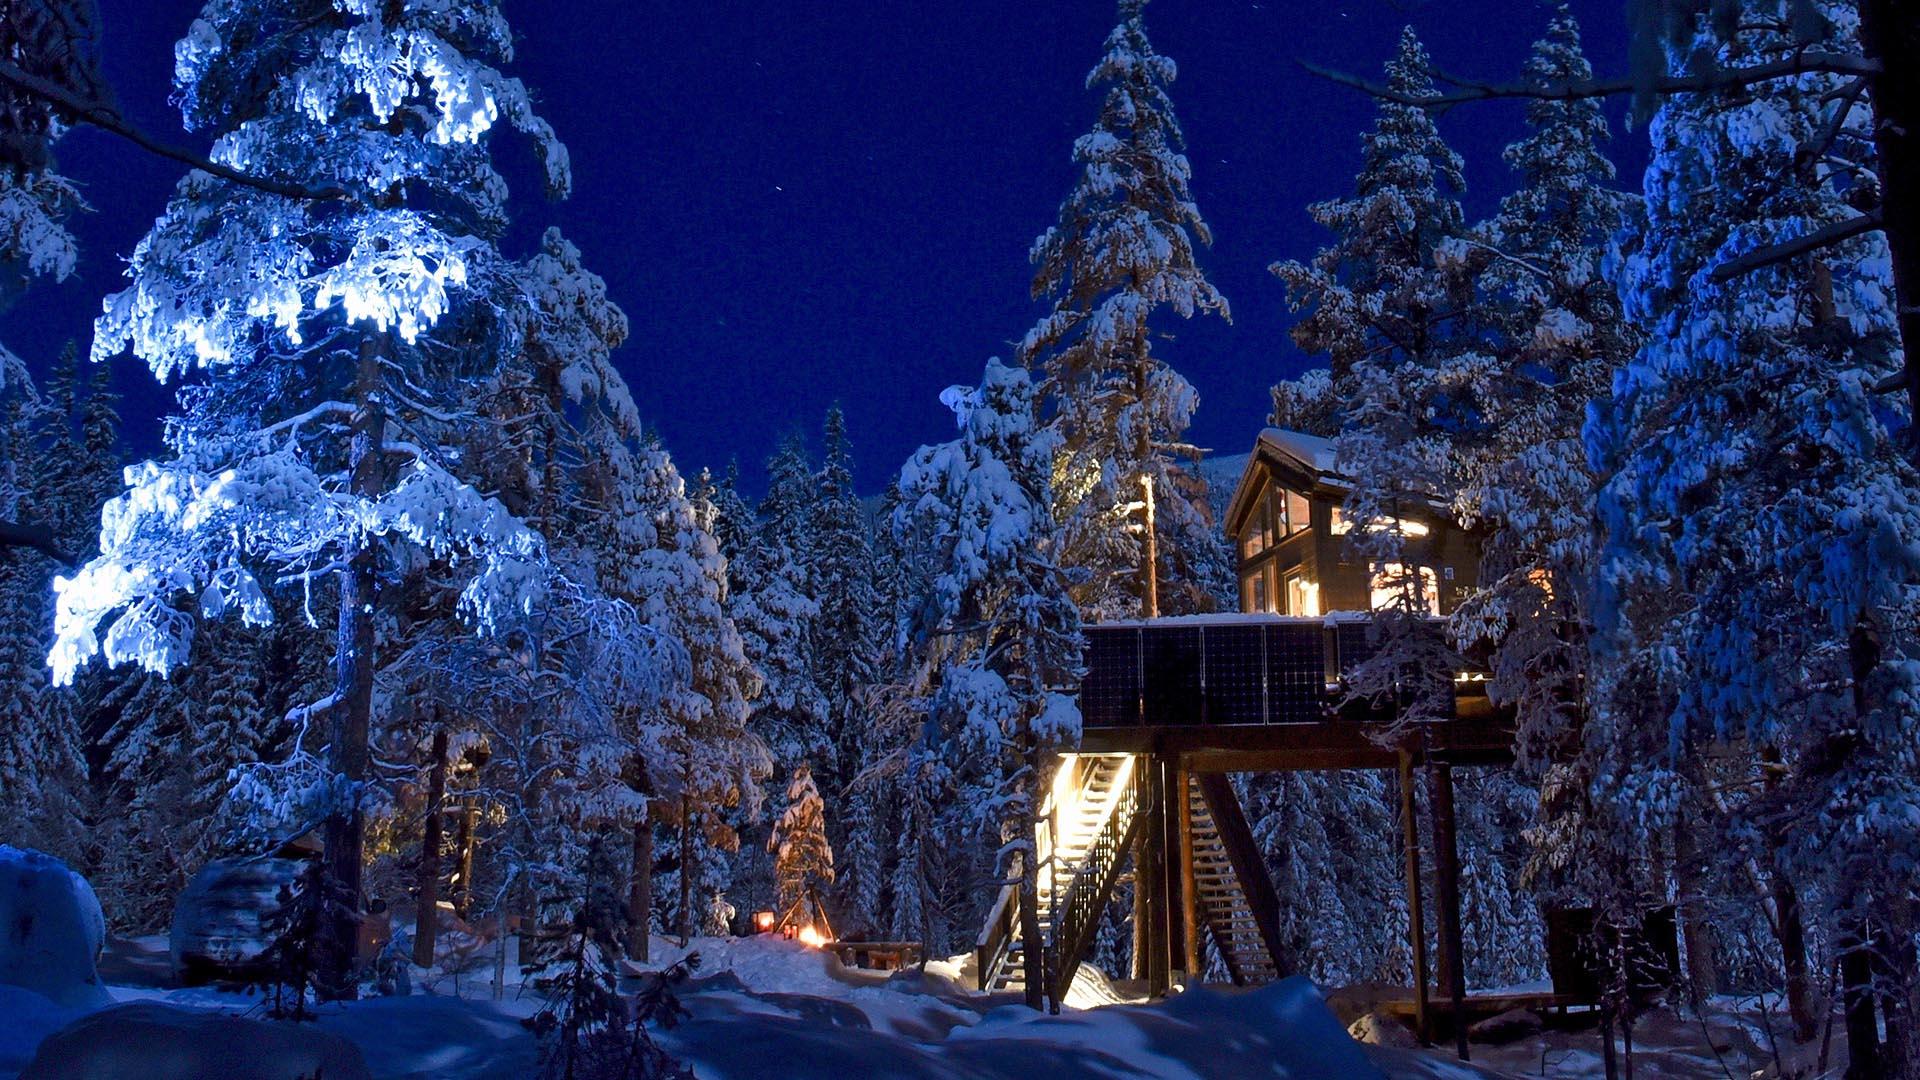 A treetop cabin in teh winter forest by night. The light from the cabin light up the heavyly snow-covered pine trees and the night sky in dark blue.